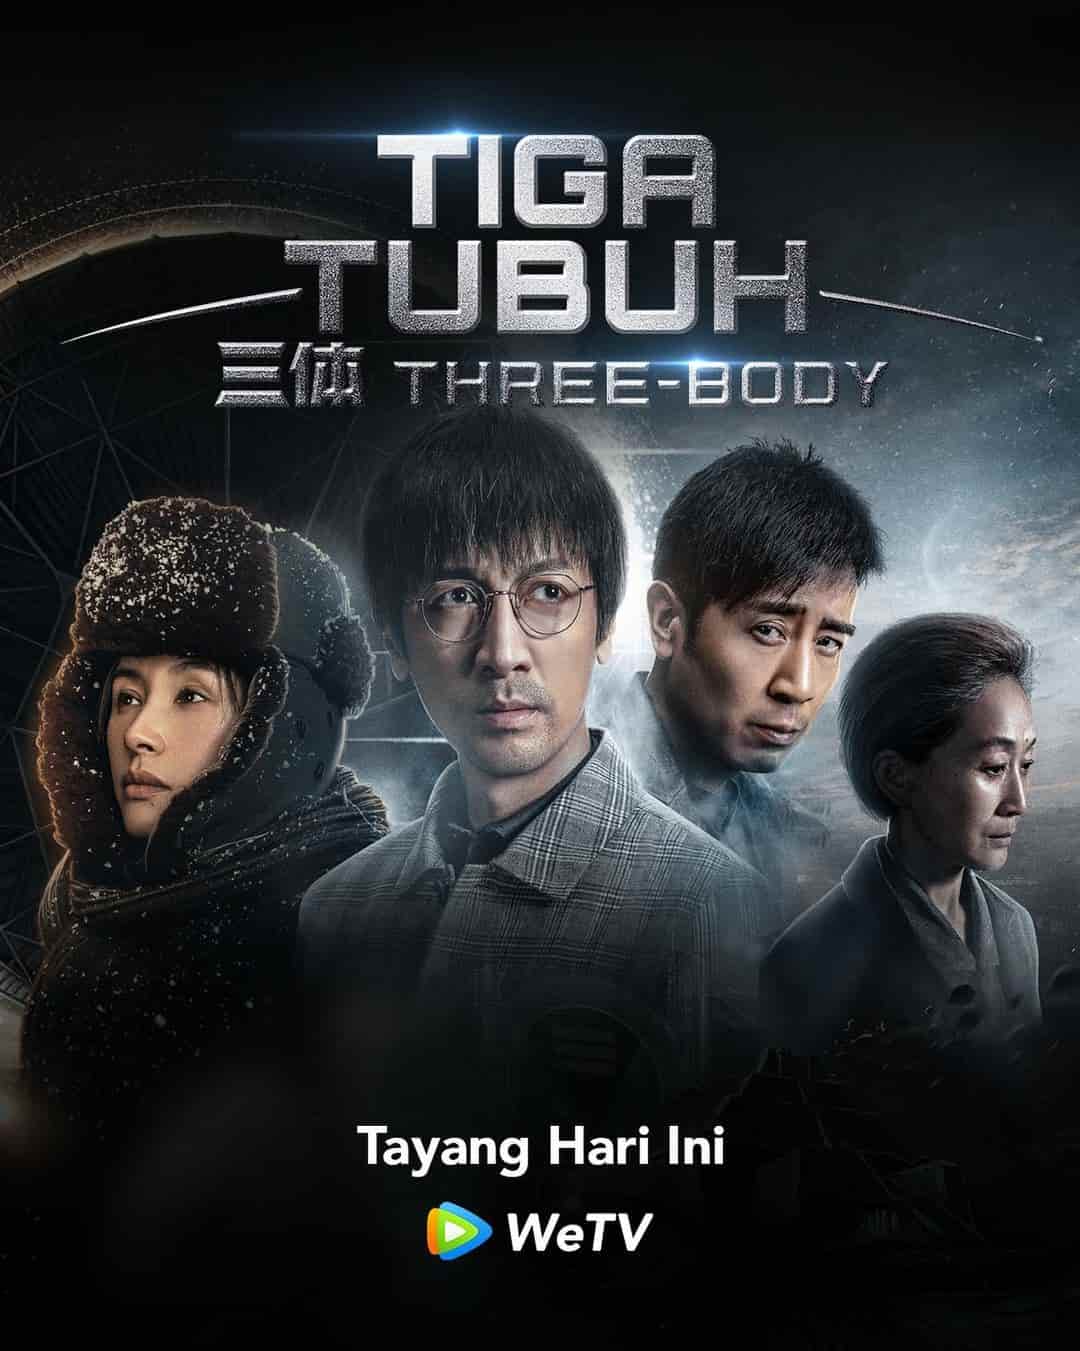 Three Body - Sinopsis, Pemain, OST, Episode, Review